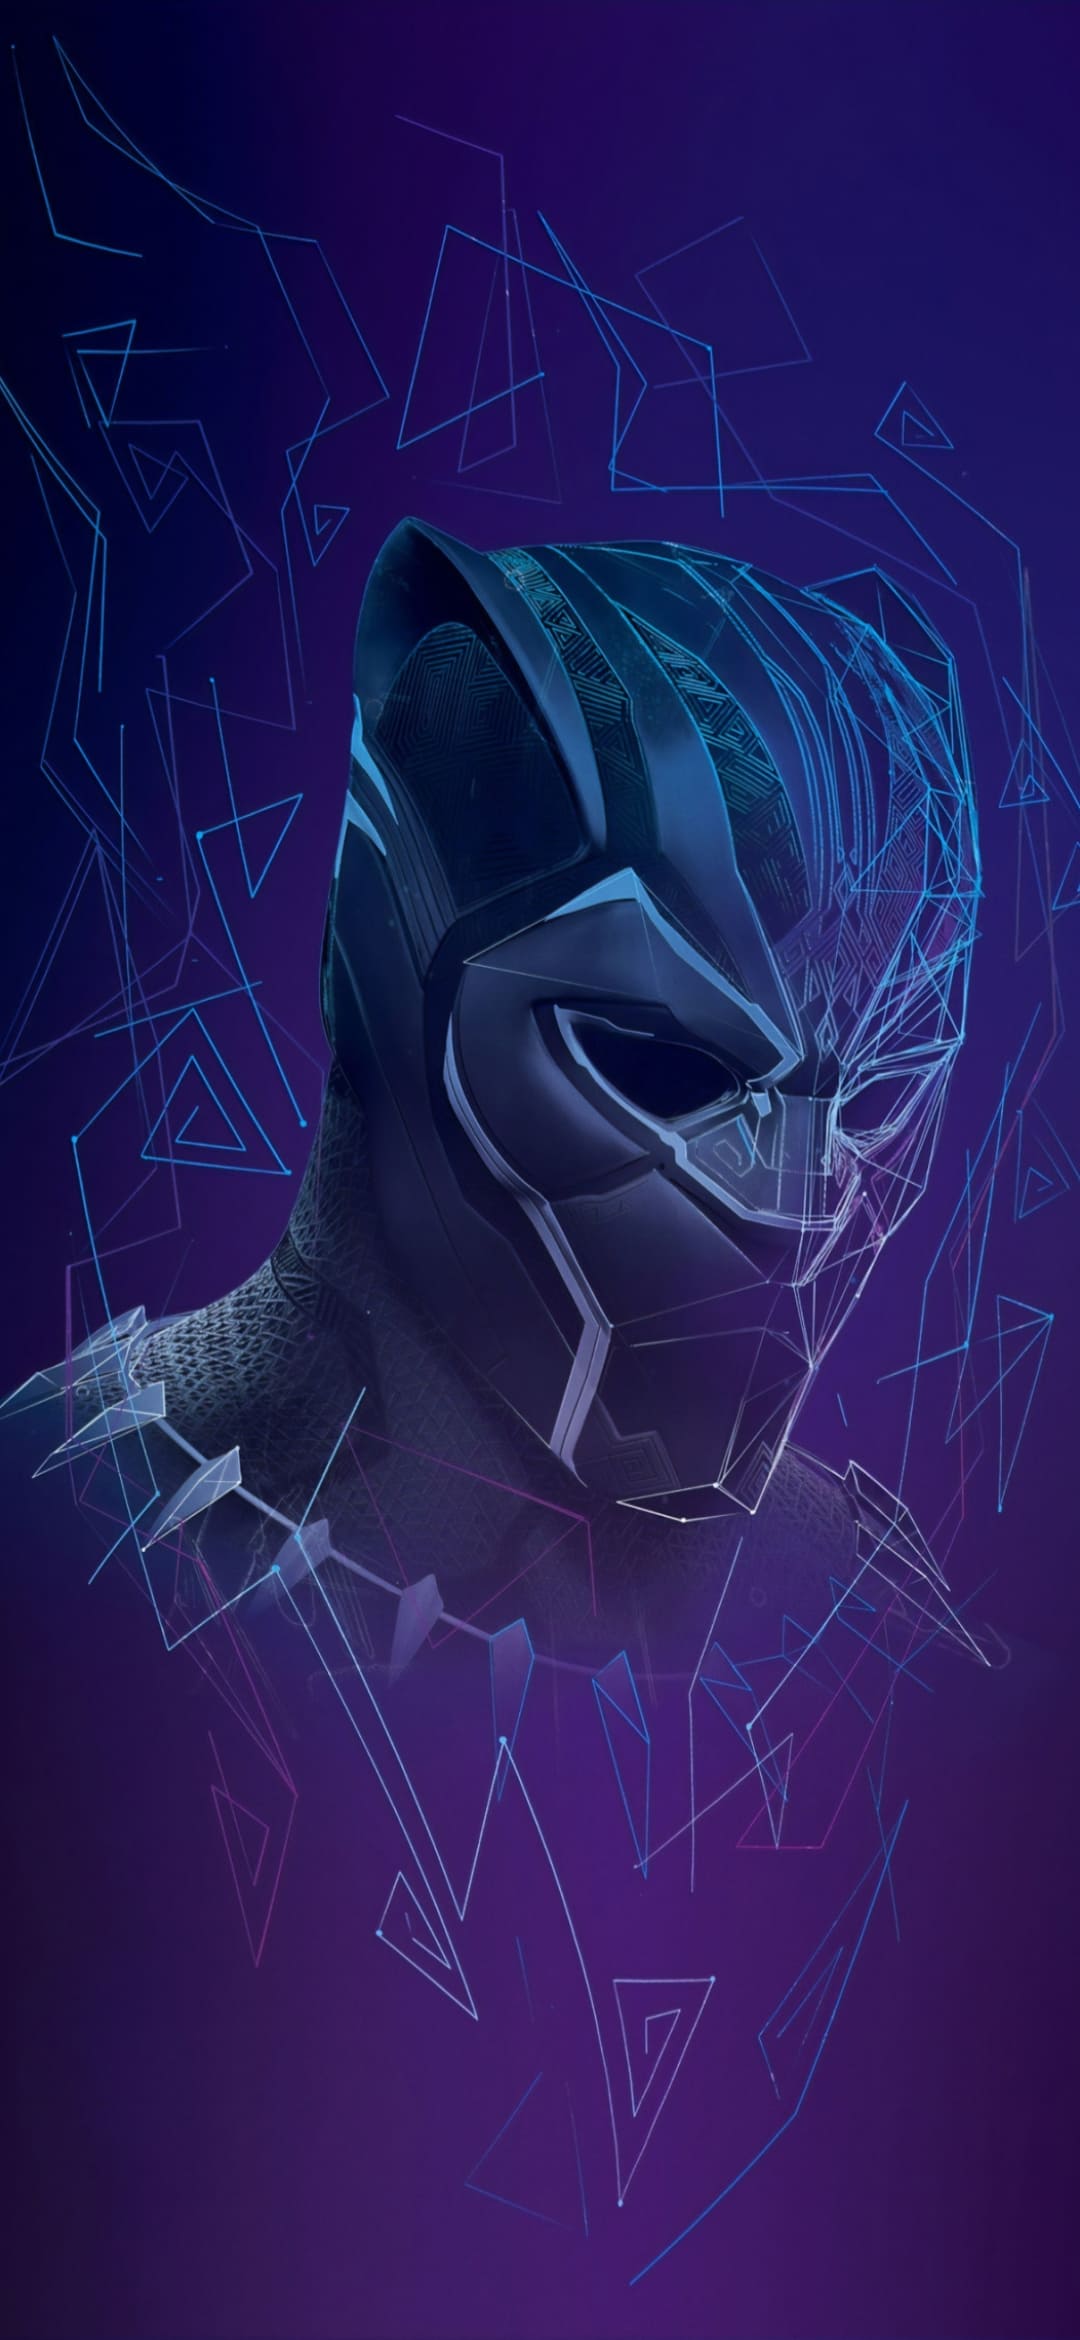 Featured image of post Ultra Hd Black Panther Wallpaper 4K For Mobile - Download and share awesome cool background hd mobile phone wallpapers.